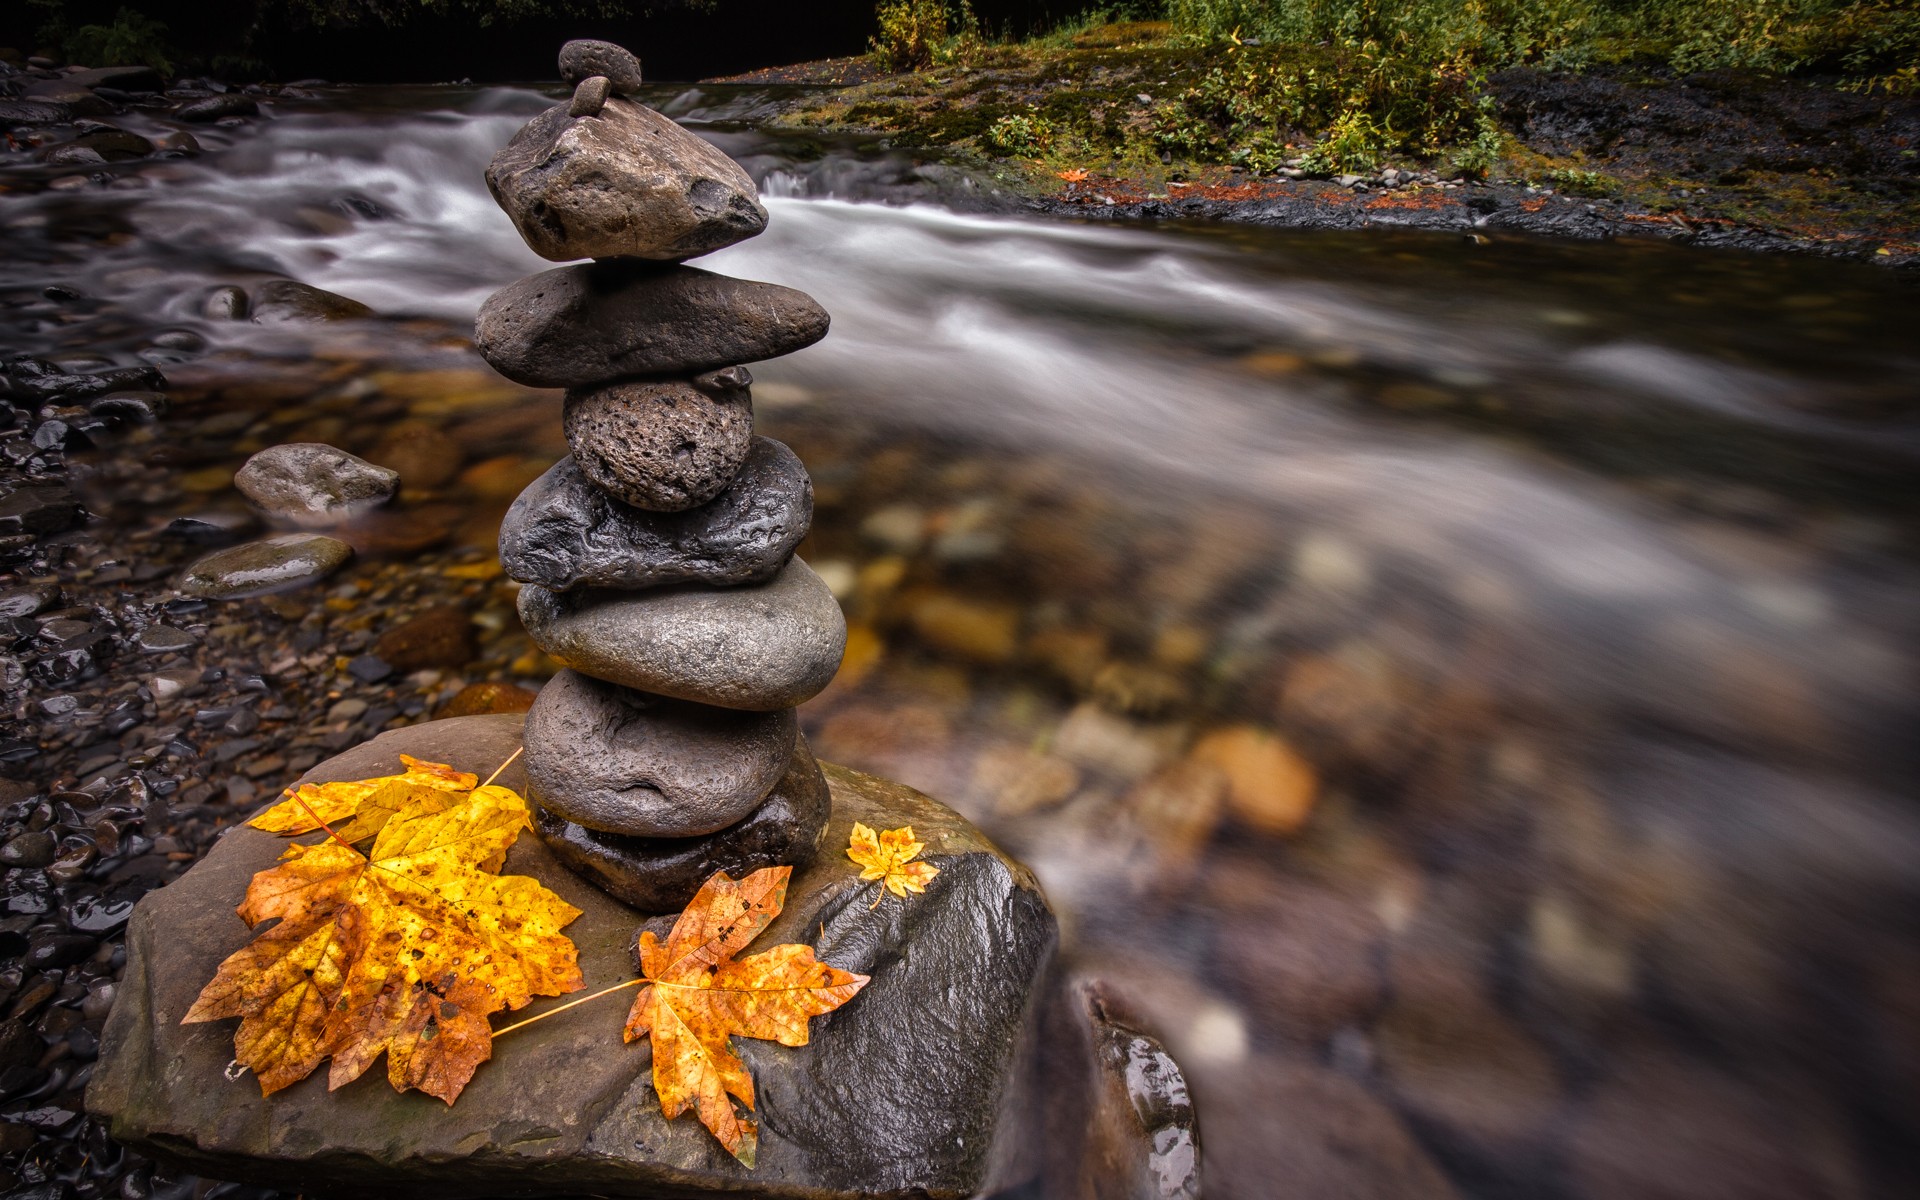 General 1920x1200 stones water creeks long exposure nature outdoors leaves fallen leaves fall cairn